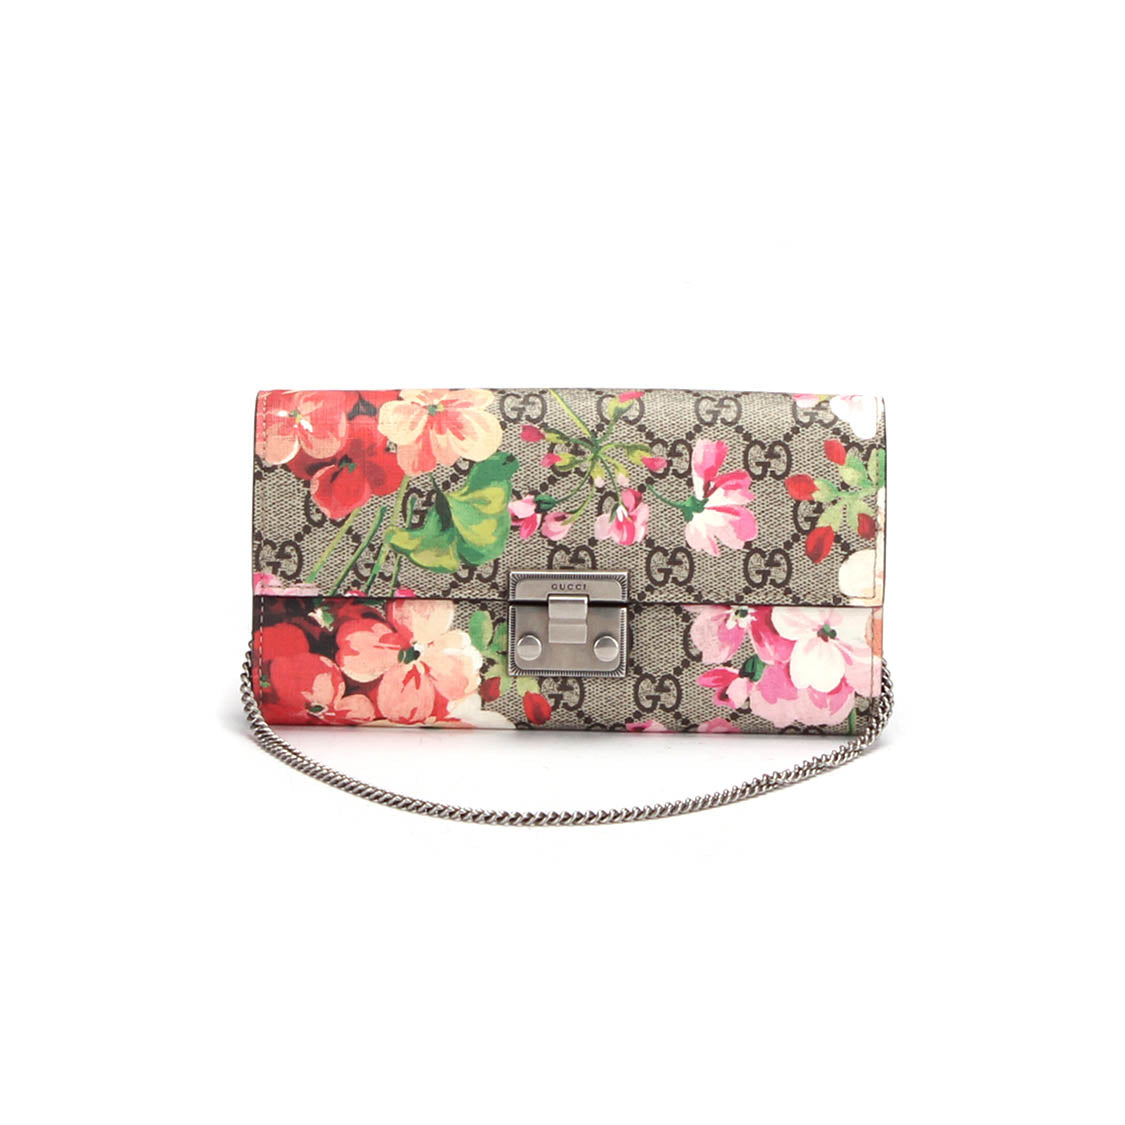 GG Supreme Blooms Wallet on Chain 453506